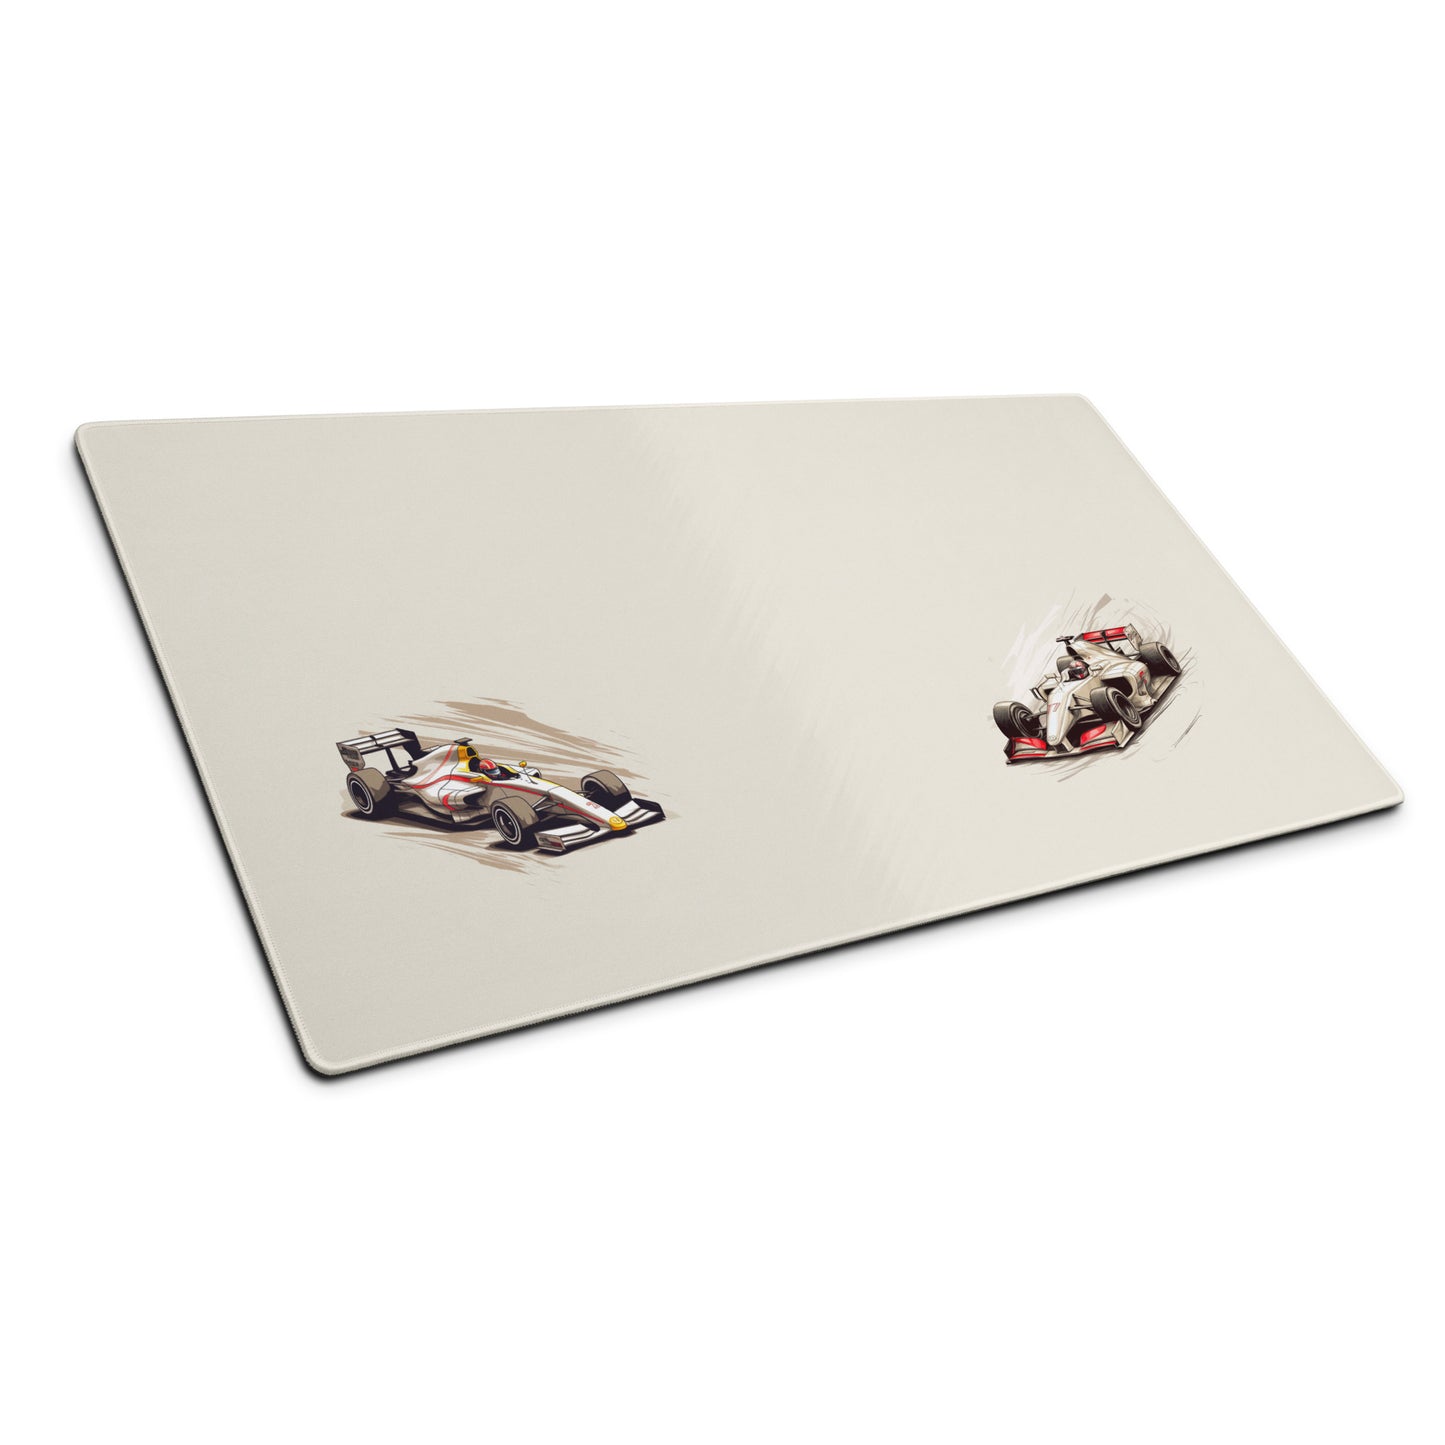 A 36" x 18" desk pad with two fast formula one cars on the sides shown at an angle. Beige in color.